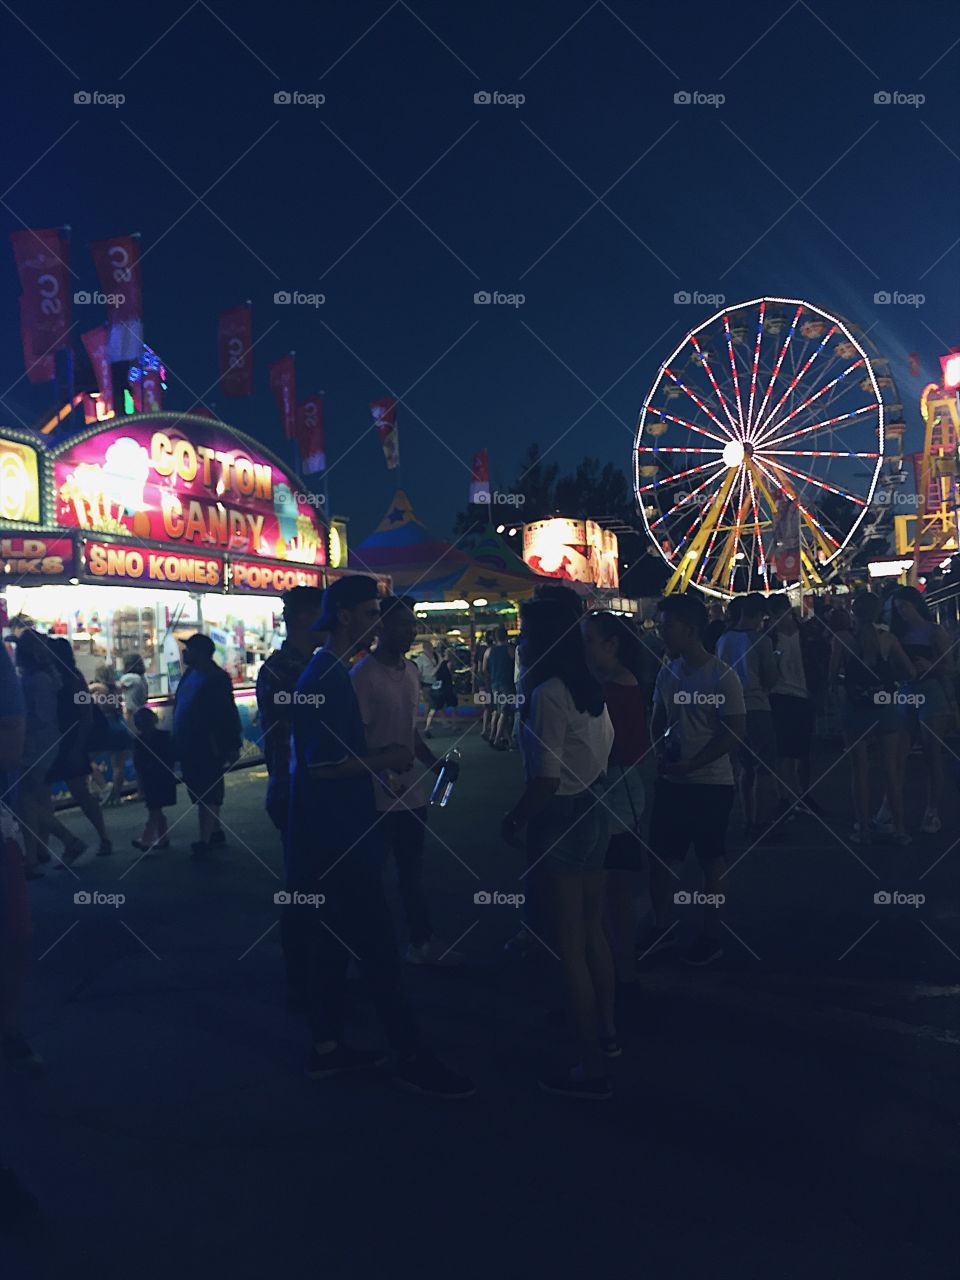 A whimsical evening on a midway, featuring a neon Ferris wheel and an abundance of carnival snacks.   